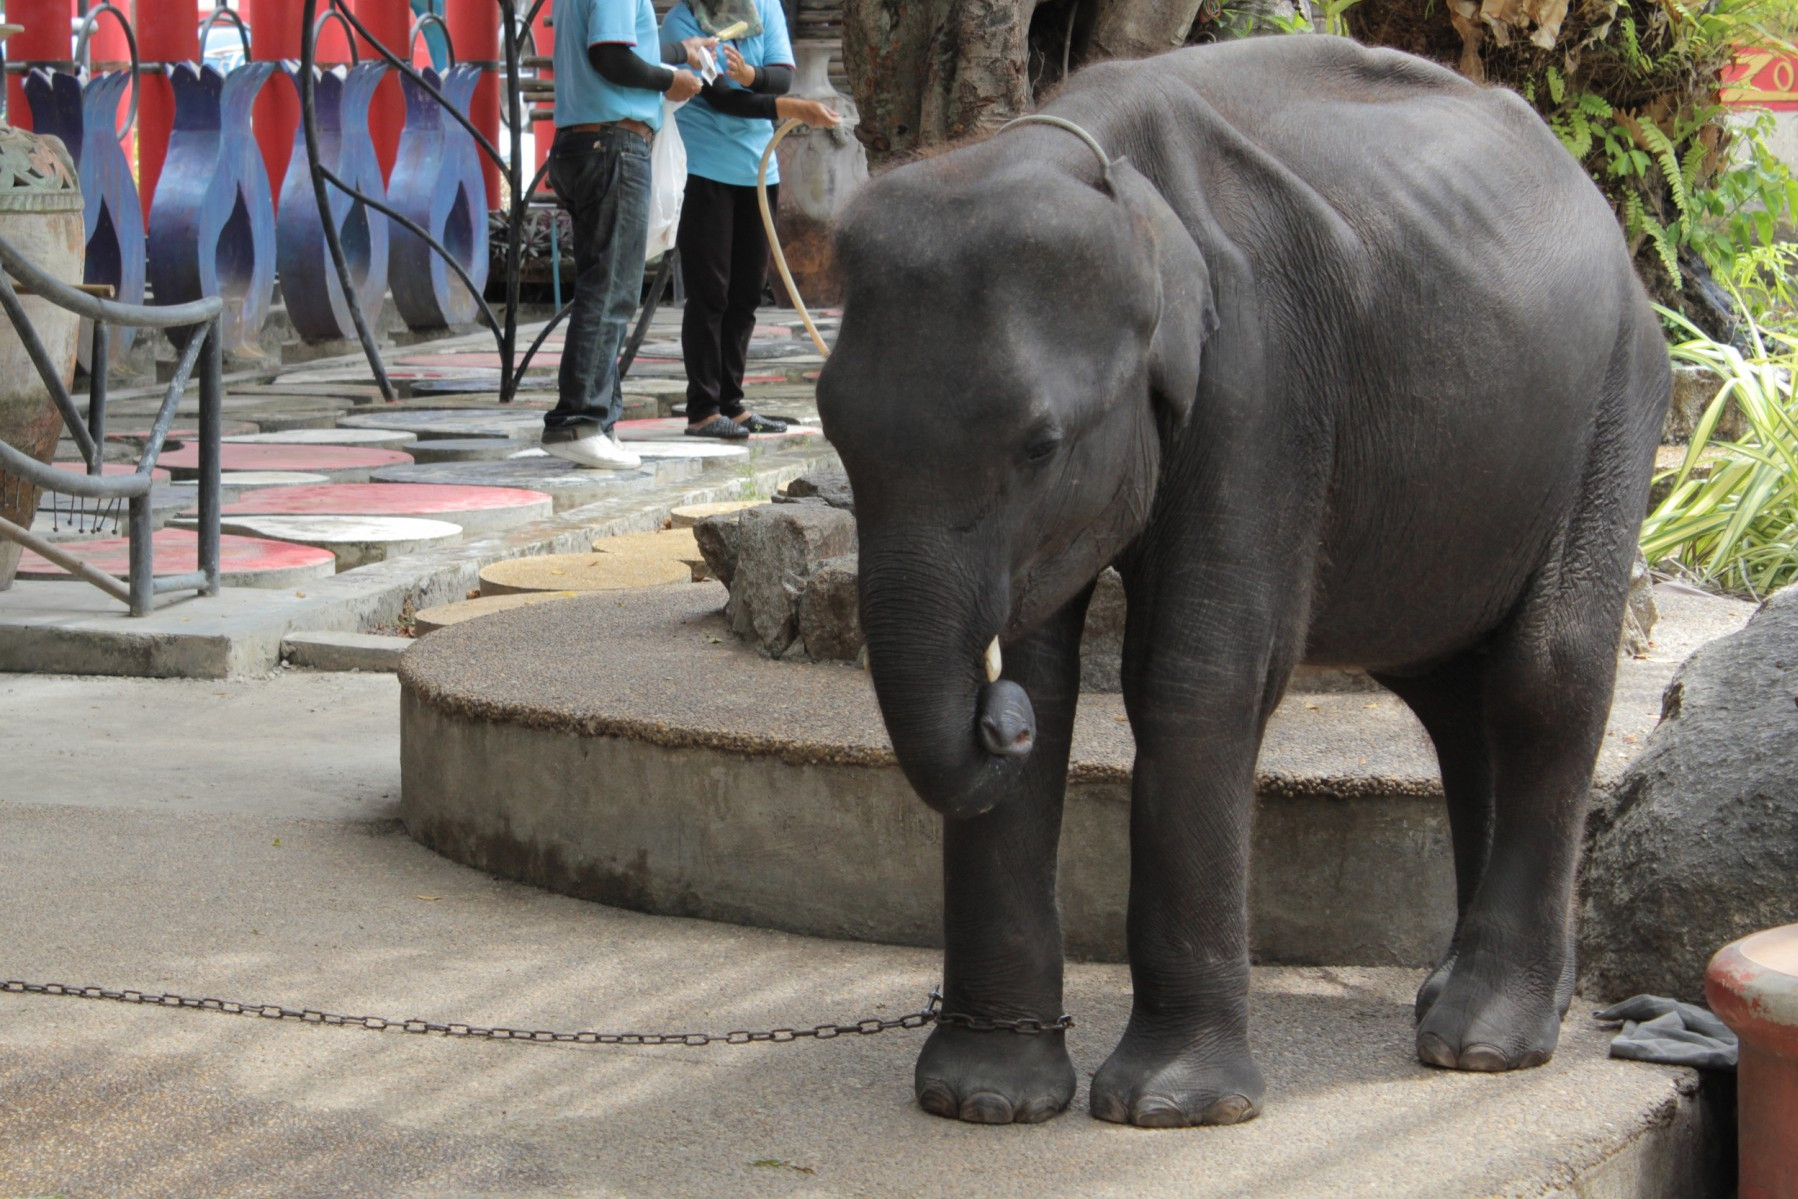 A baby elephant in Phuket zoo. Babies like this will have been subjected to the cruelty of 'the crush'